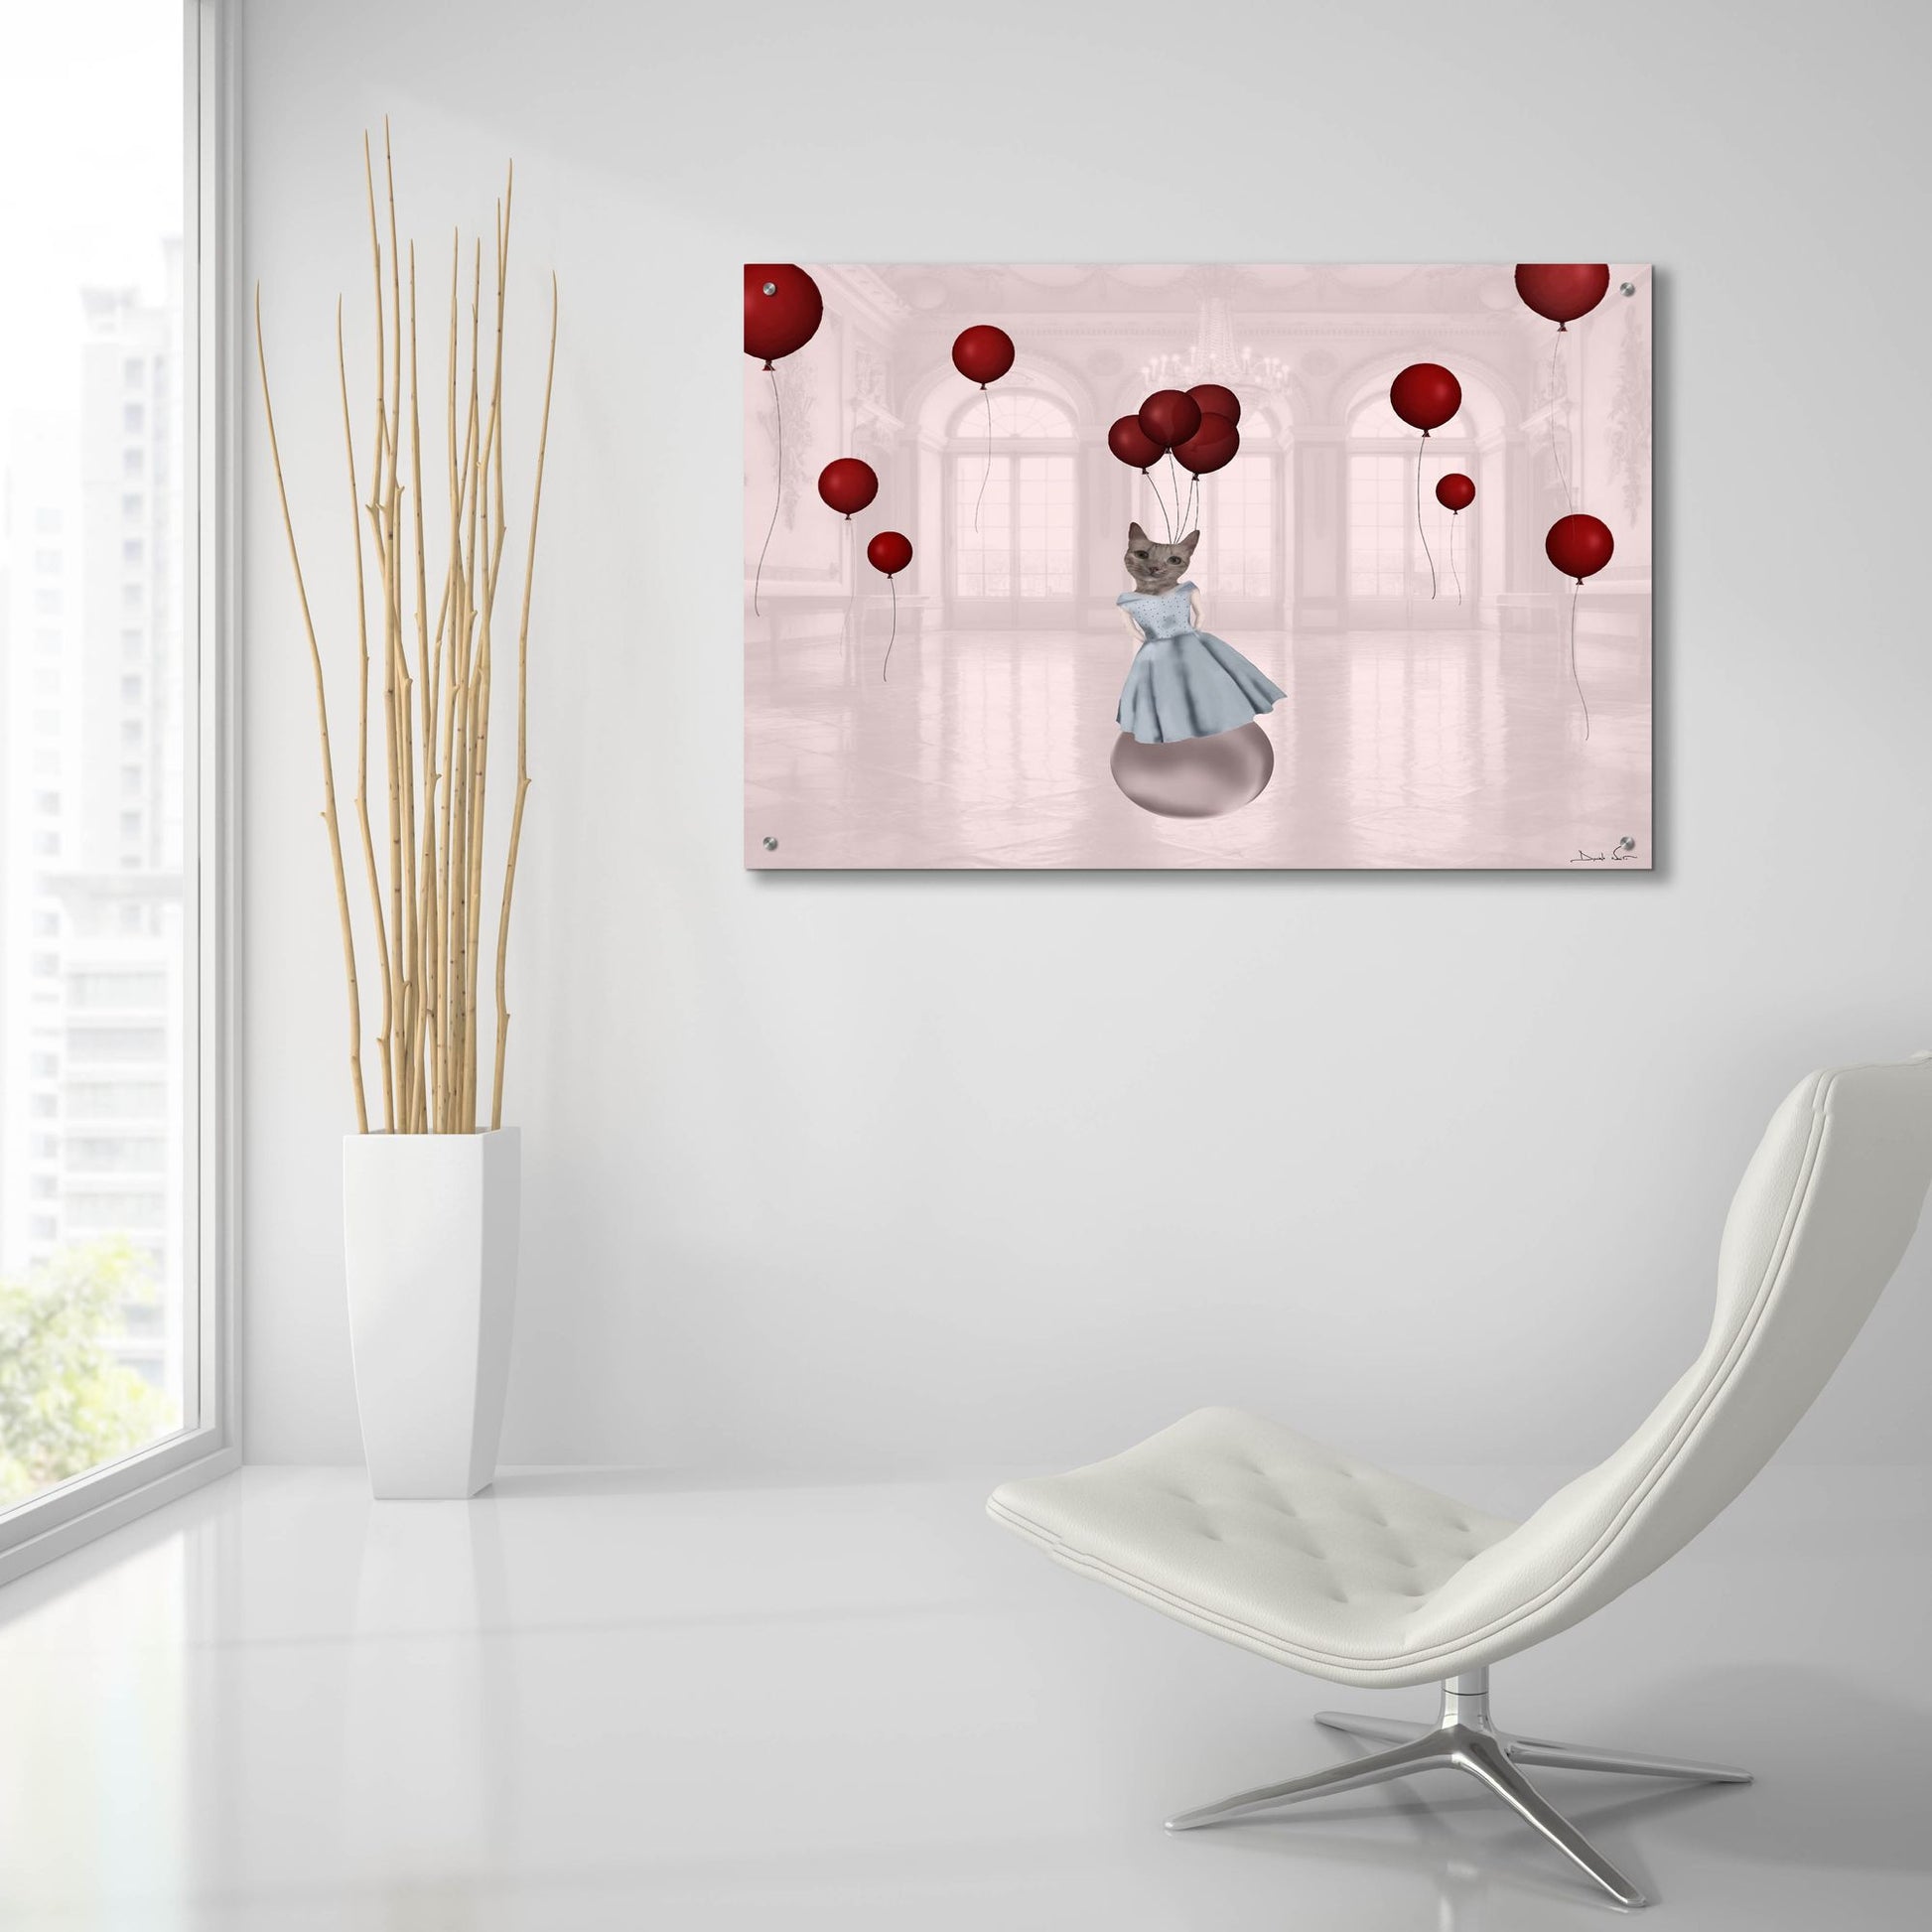 Epic Art 'Ball With Balloons' by Daniela Nocito, Acrylic Glass Wall Art,36x24